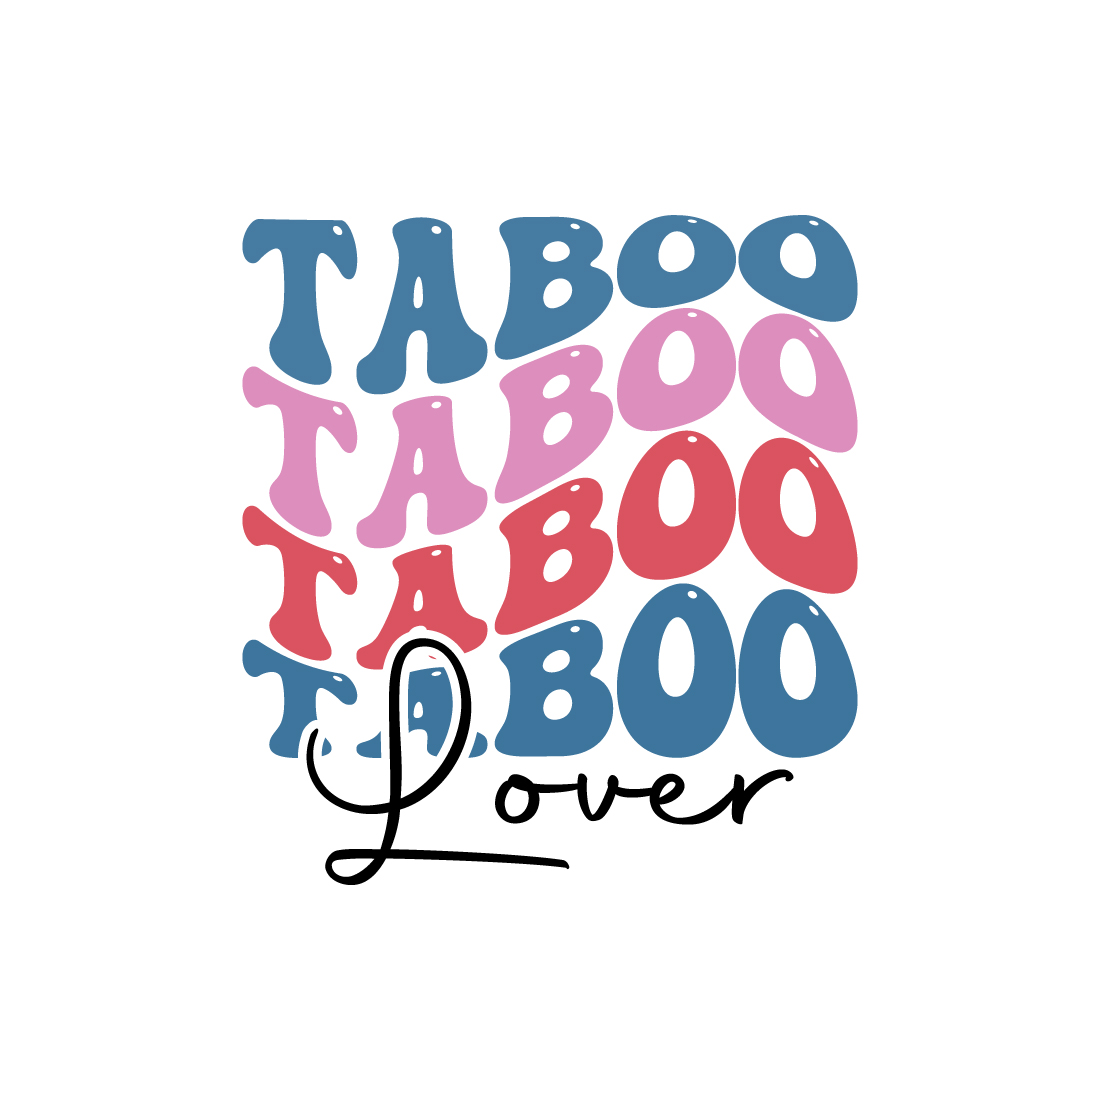 Taboo lover indoor game typography design for t-shirts, cards, frame artwork, phone cases, bags, mugs, stickers, tumblers, print, etc preview image.